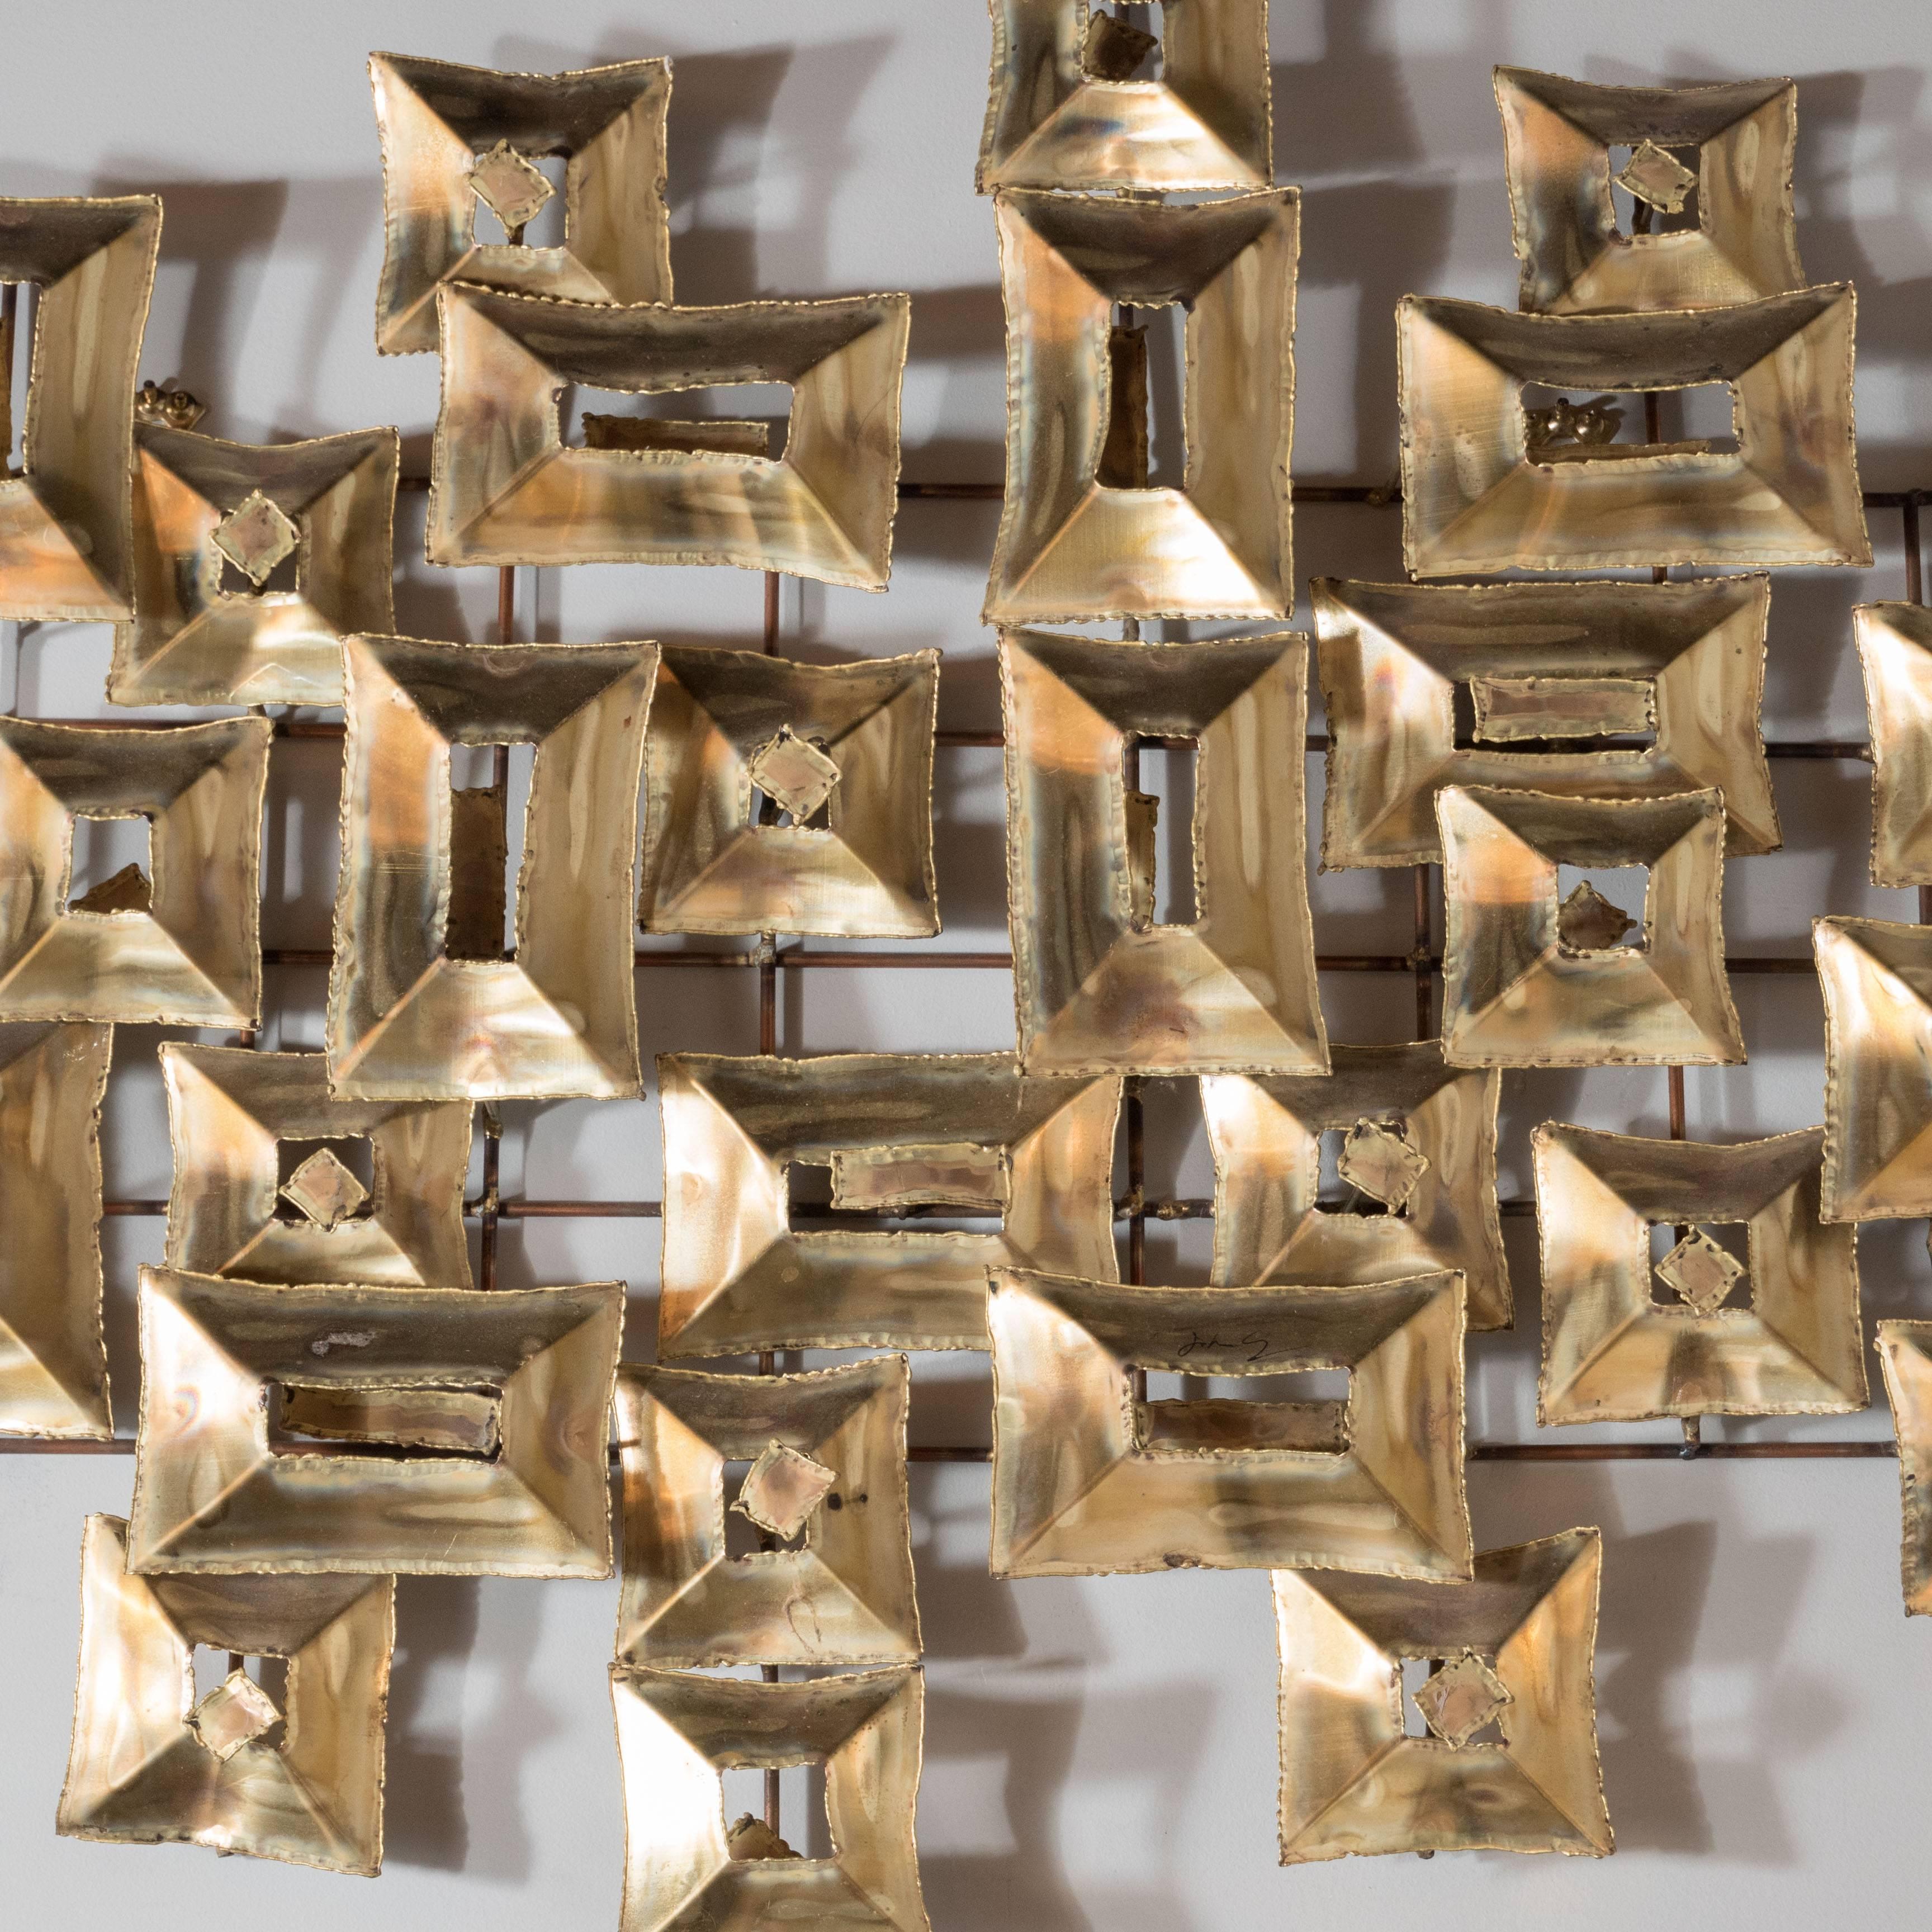 Late 20th Century Brutalist Wall Sculpture by Curtis Jere with Torch Cut Patined Brass, American